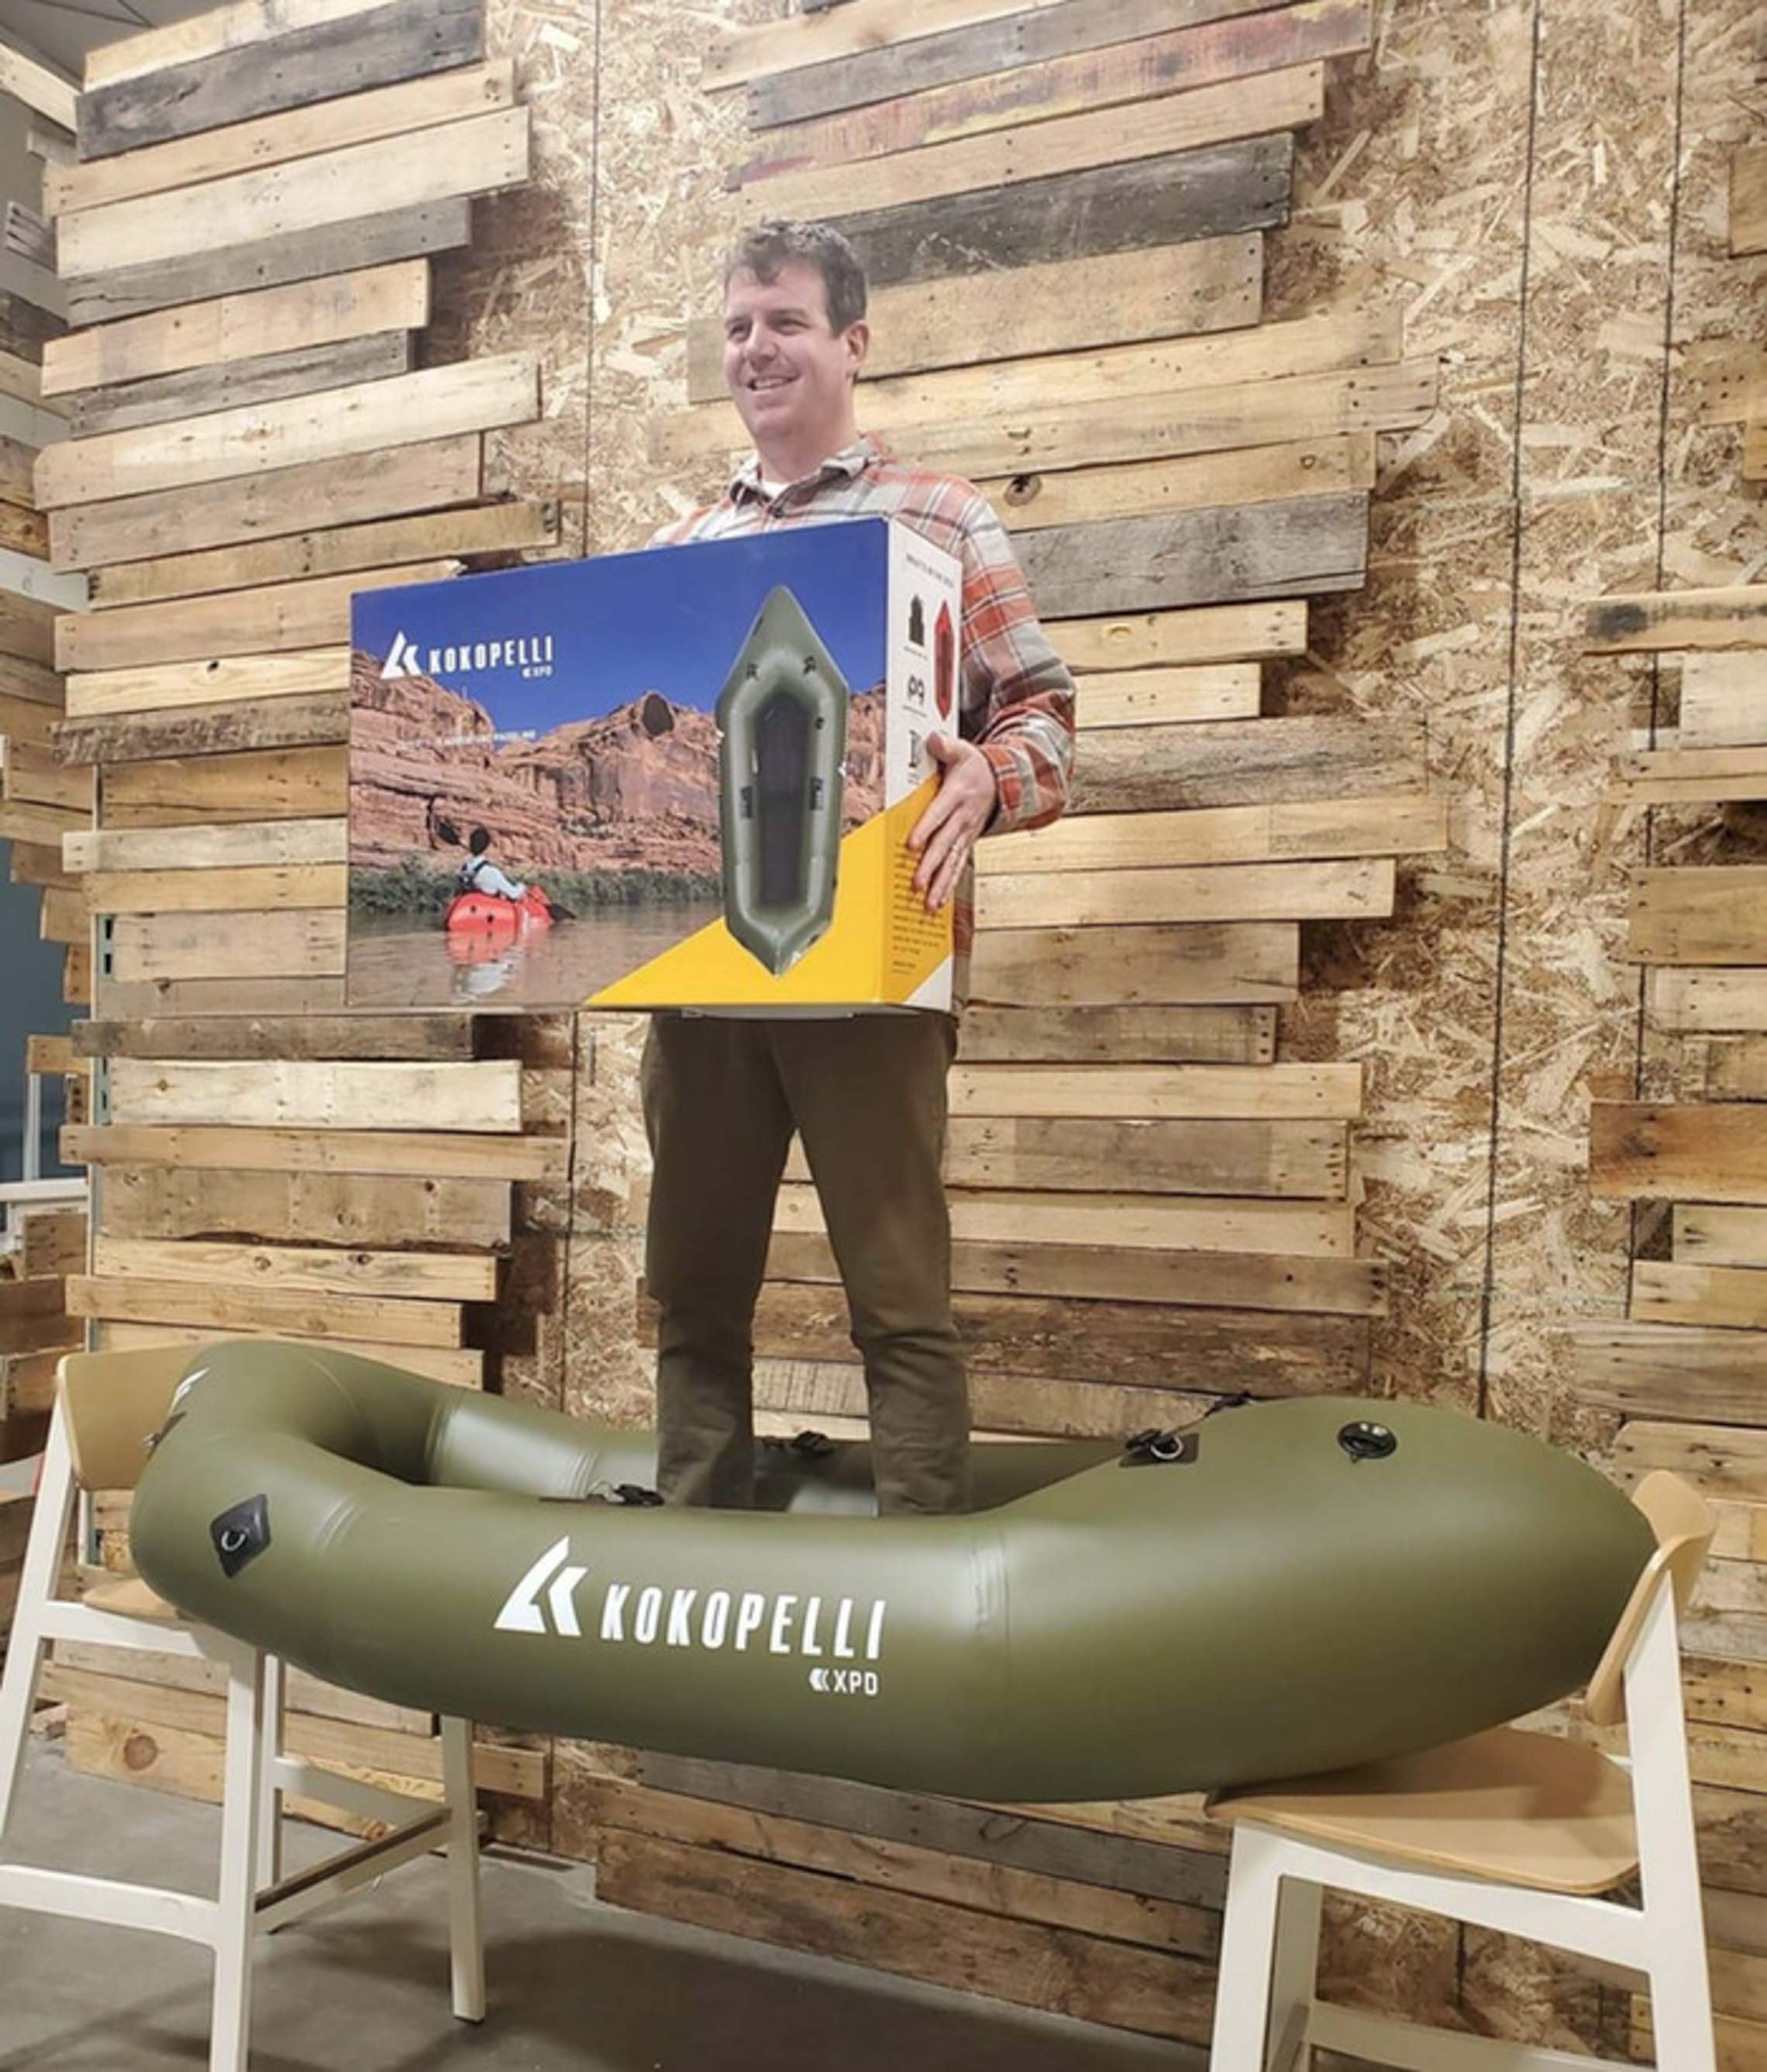 Man standing inside an XPD Kokopelli Packraft supported by two chairs